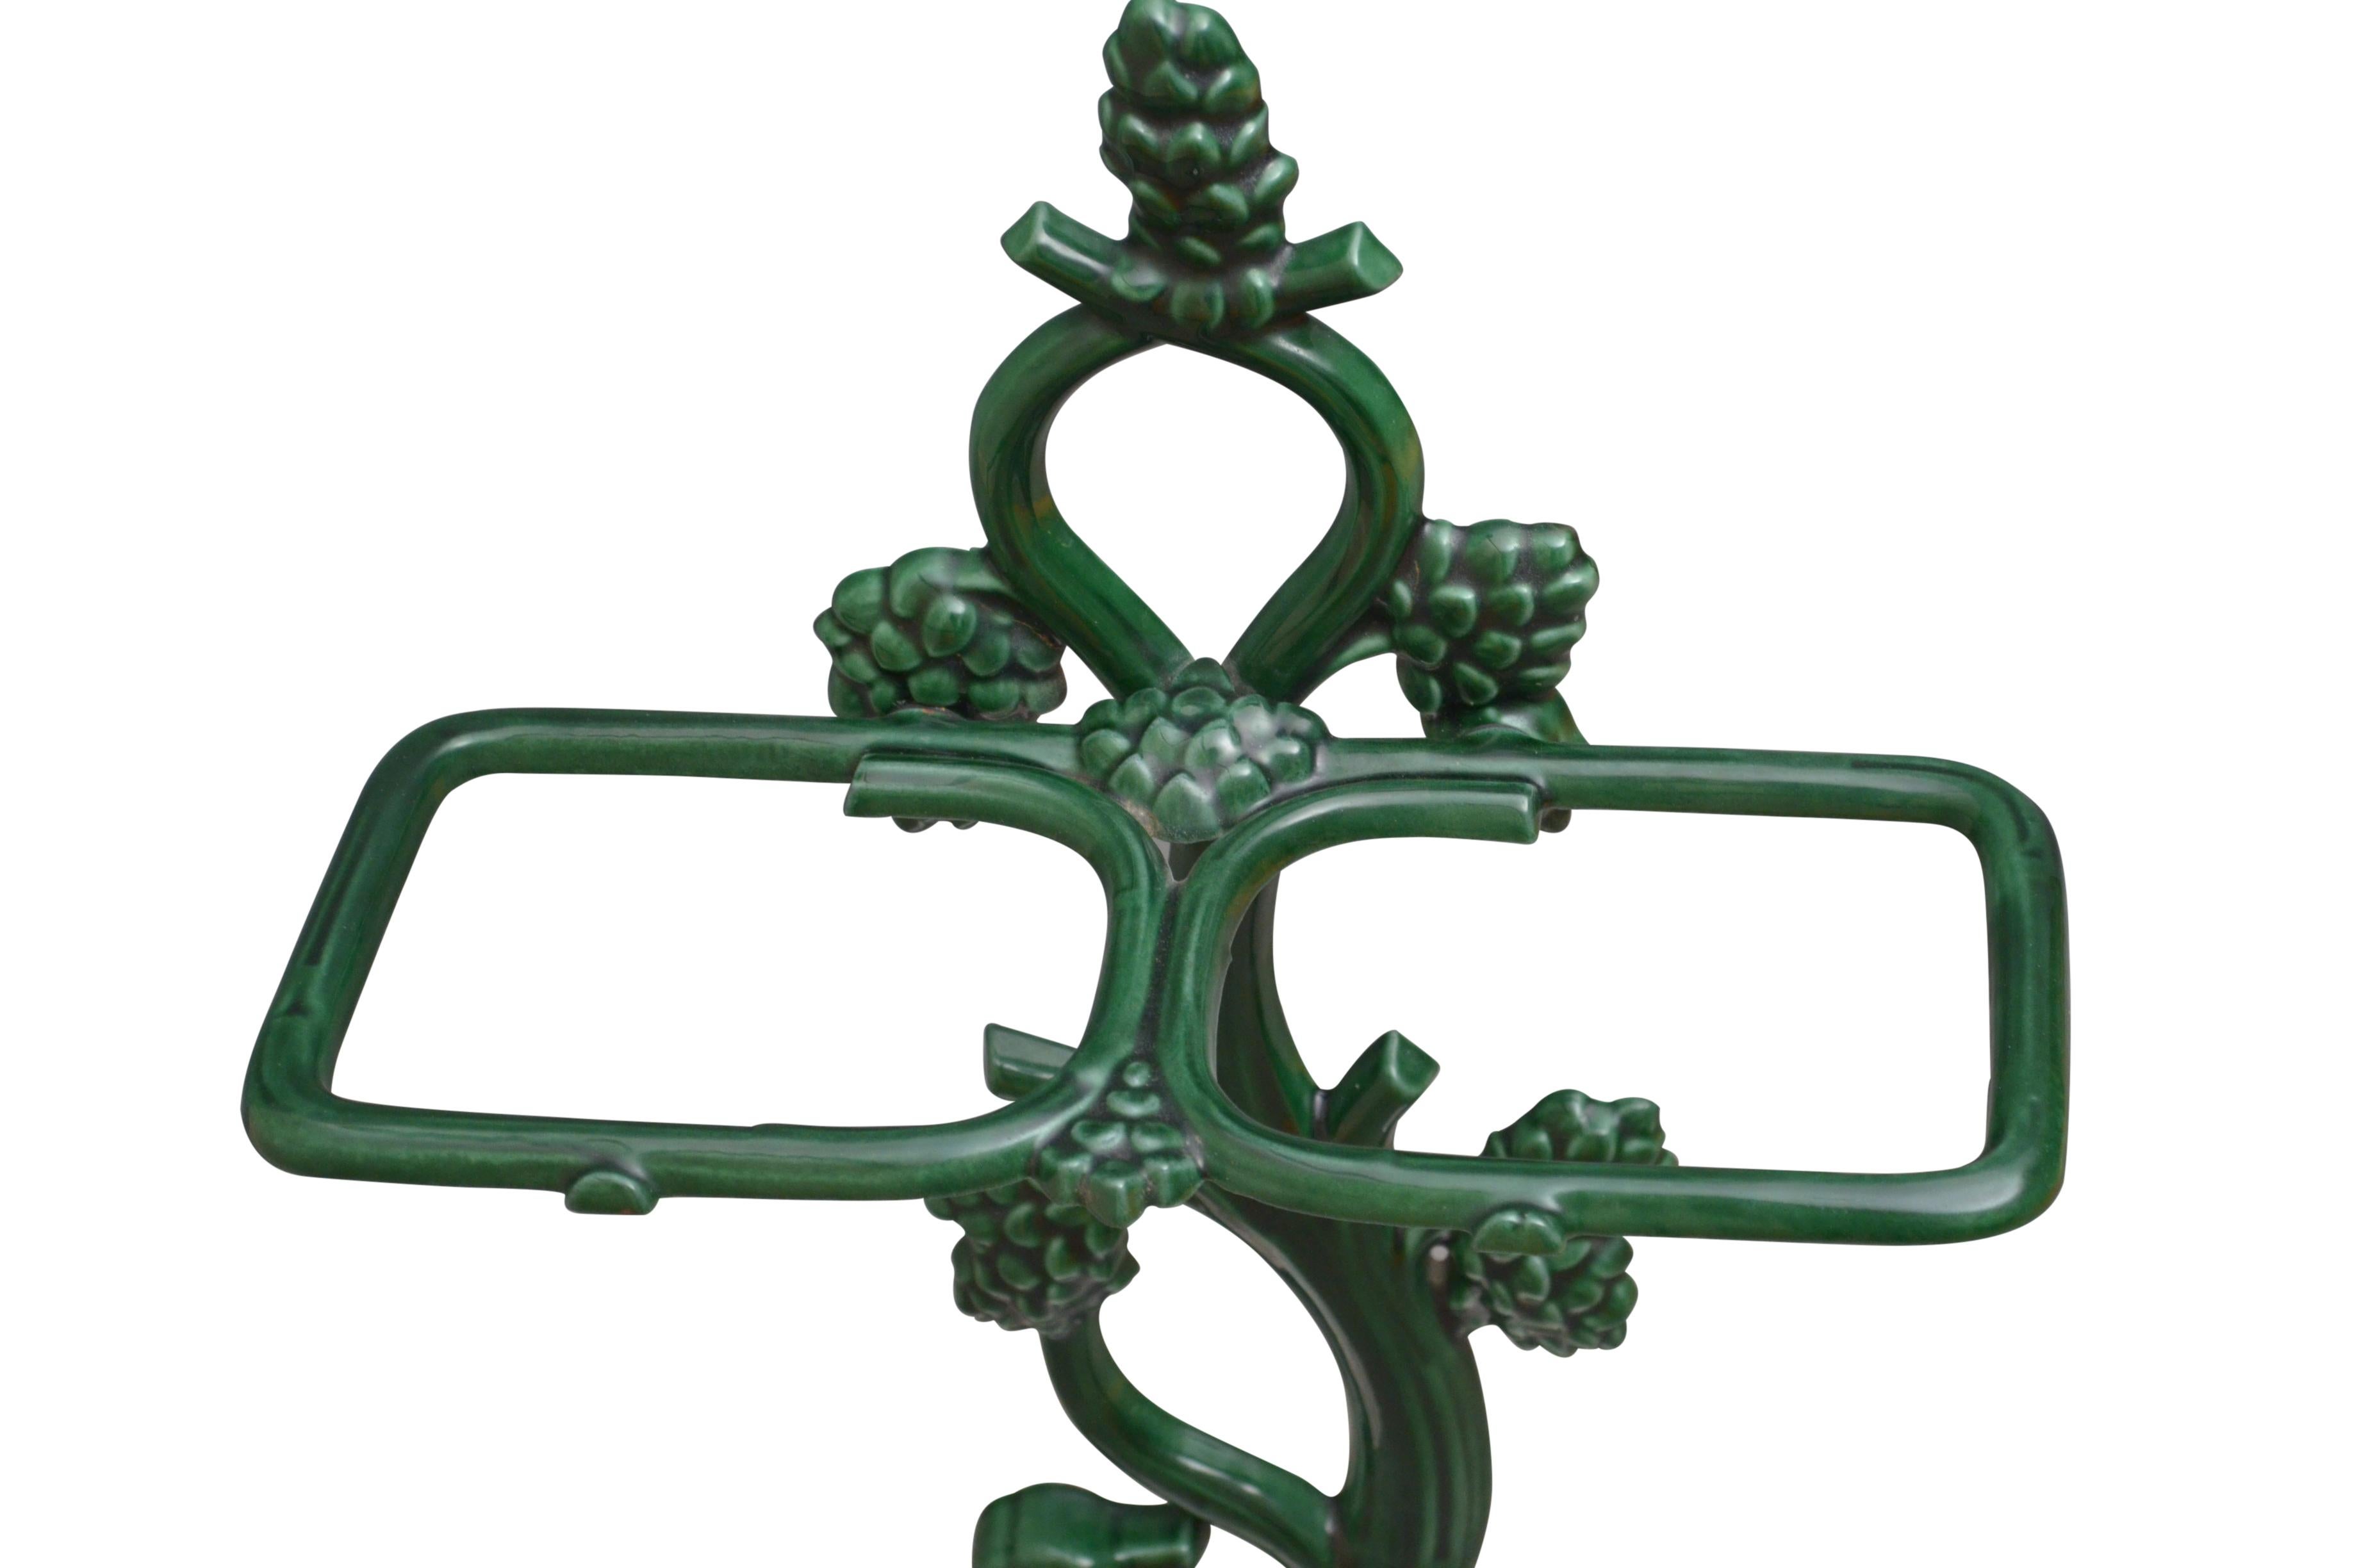 A stylish French cast iron umbrella stand retaining original green enamel and white enamelled tray and depicting a dog, all in excellent condition throughout, ready to place at home. c1930
Measures: H 27